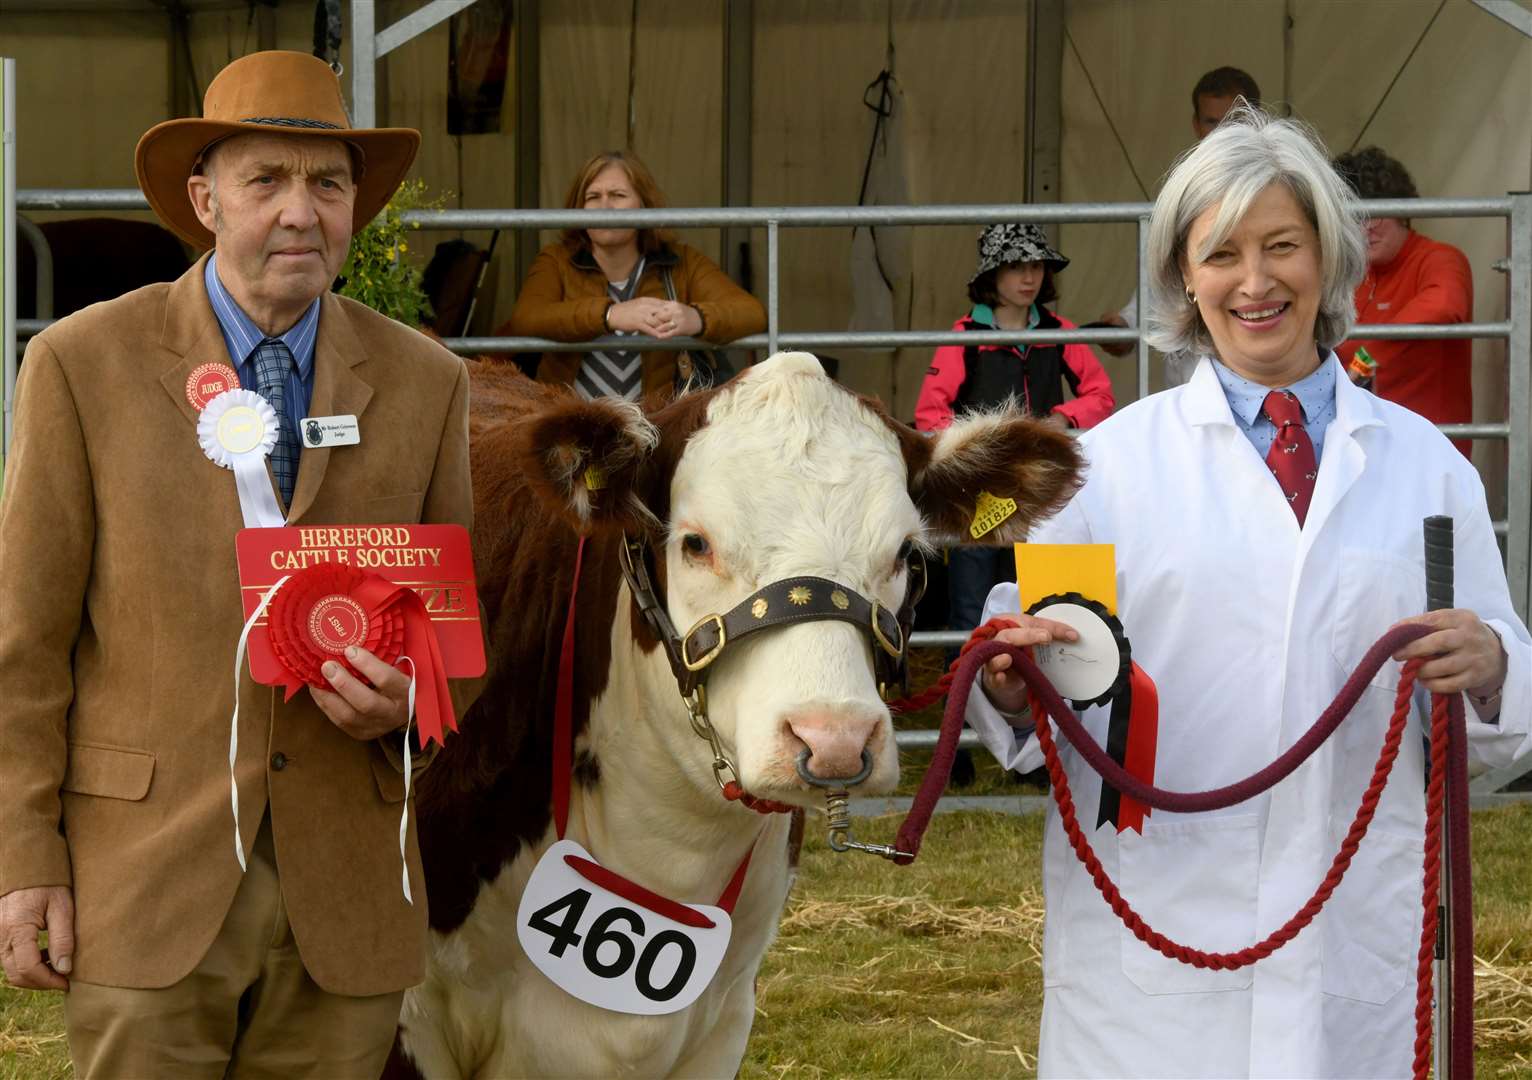 The event saw several national championships take place, including for the Hereford cattle breed. Picture: James Mackenzie.